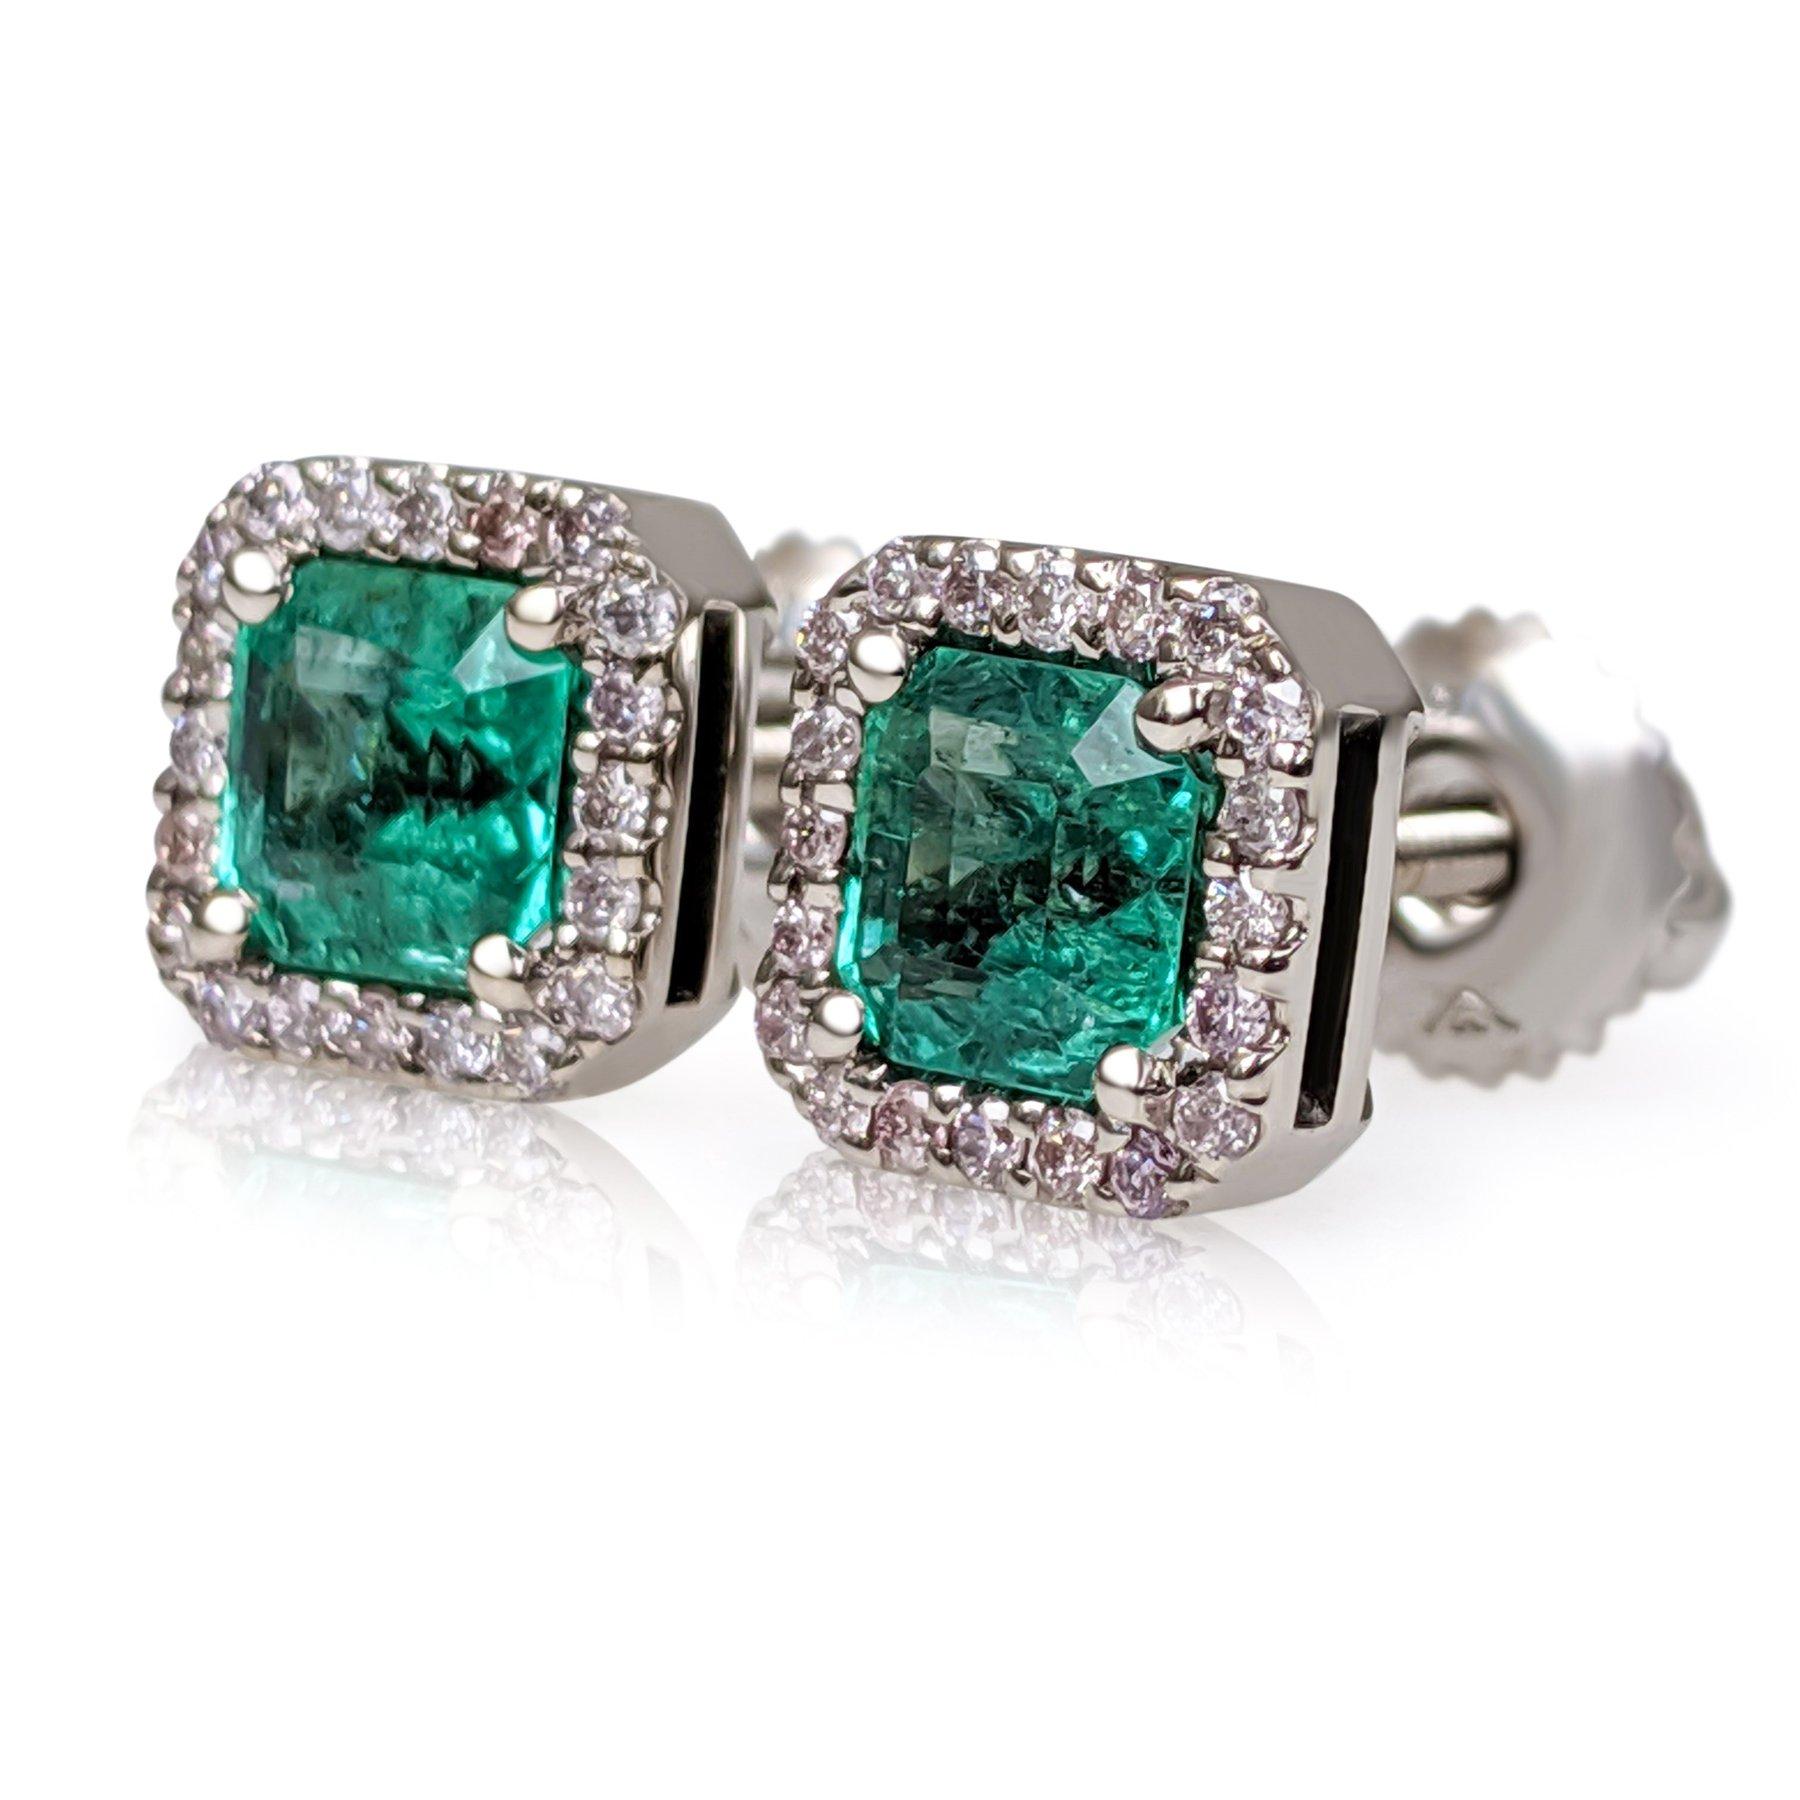 NO RESERVE! 1.26Ct Emerald & 0.20Ct Diamonds - 14 kt. White gold - Earrings 1